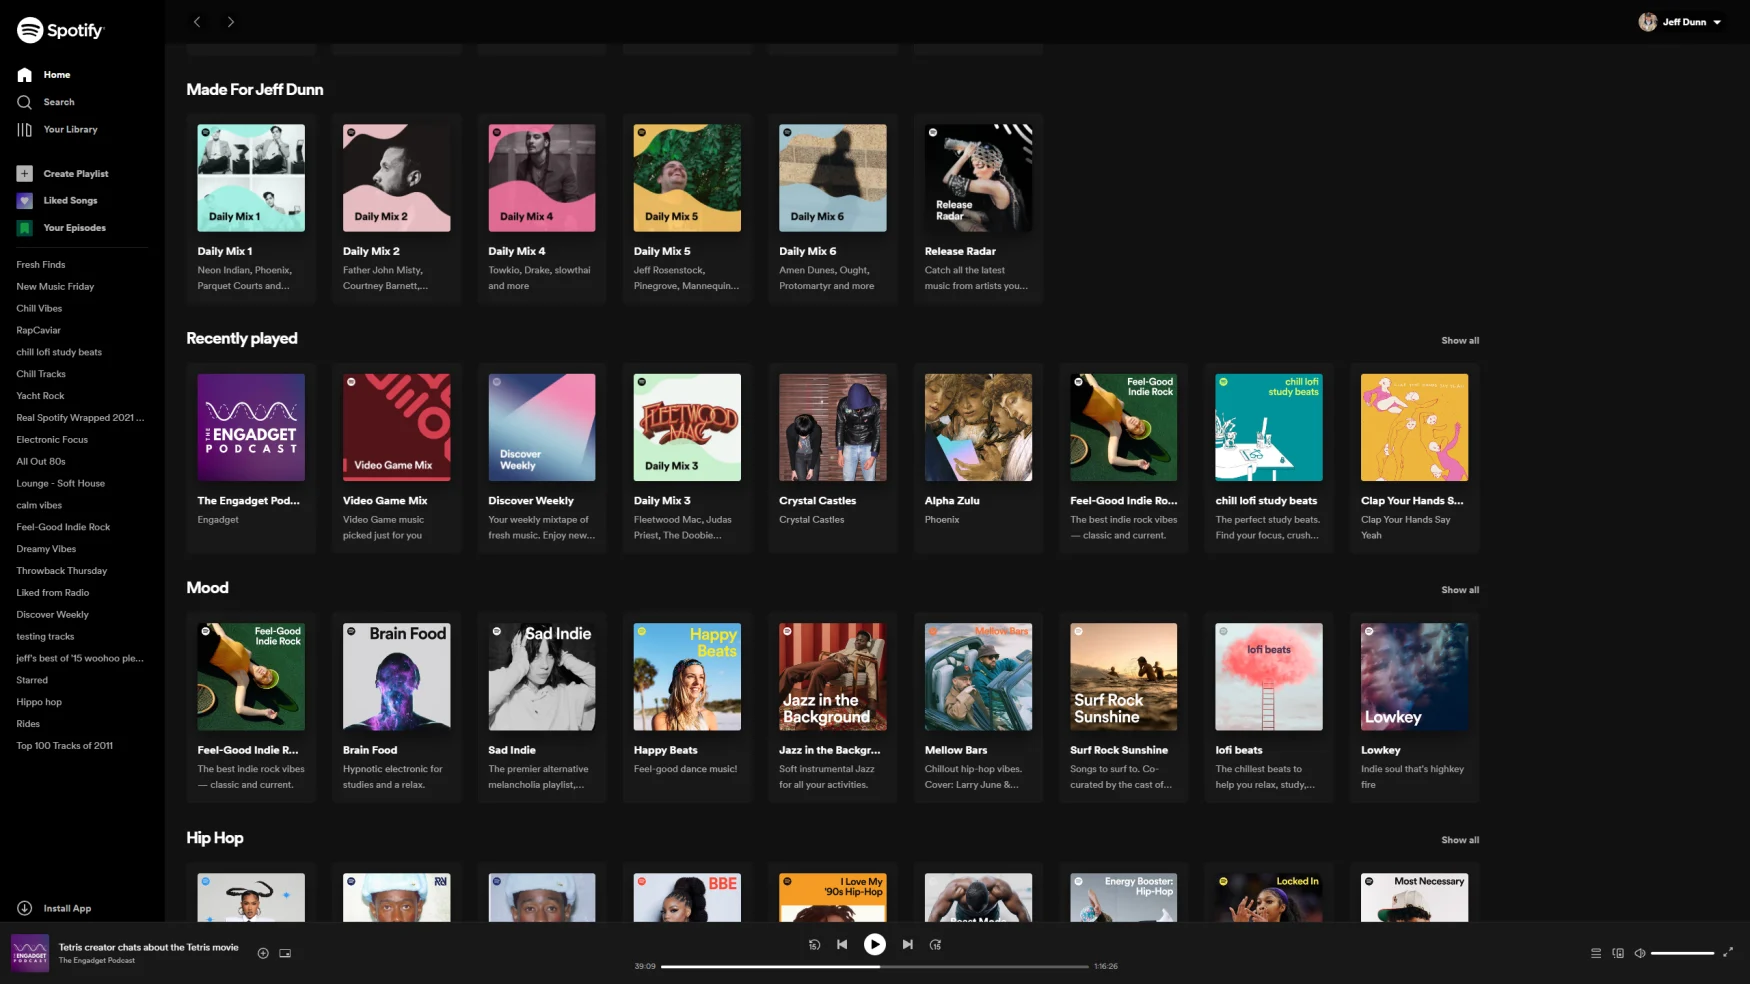 A screenshot of the Spotify app on web browsers.